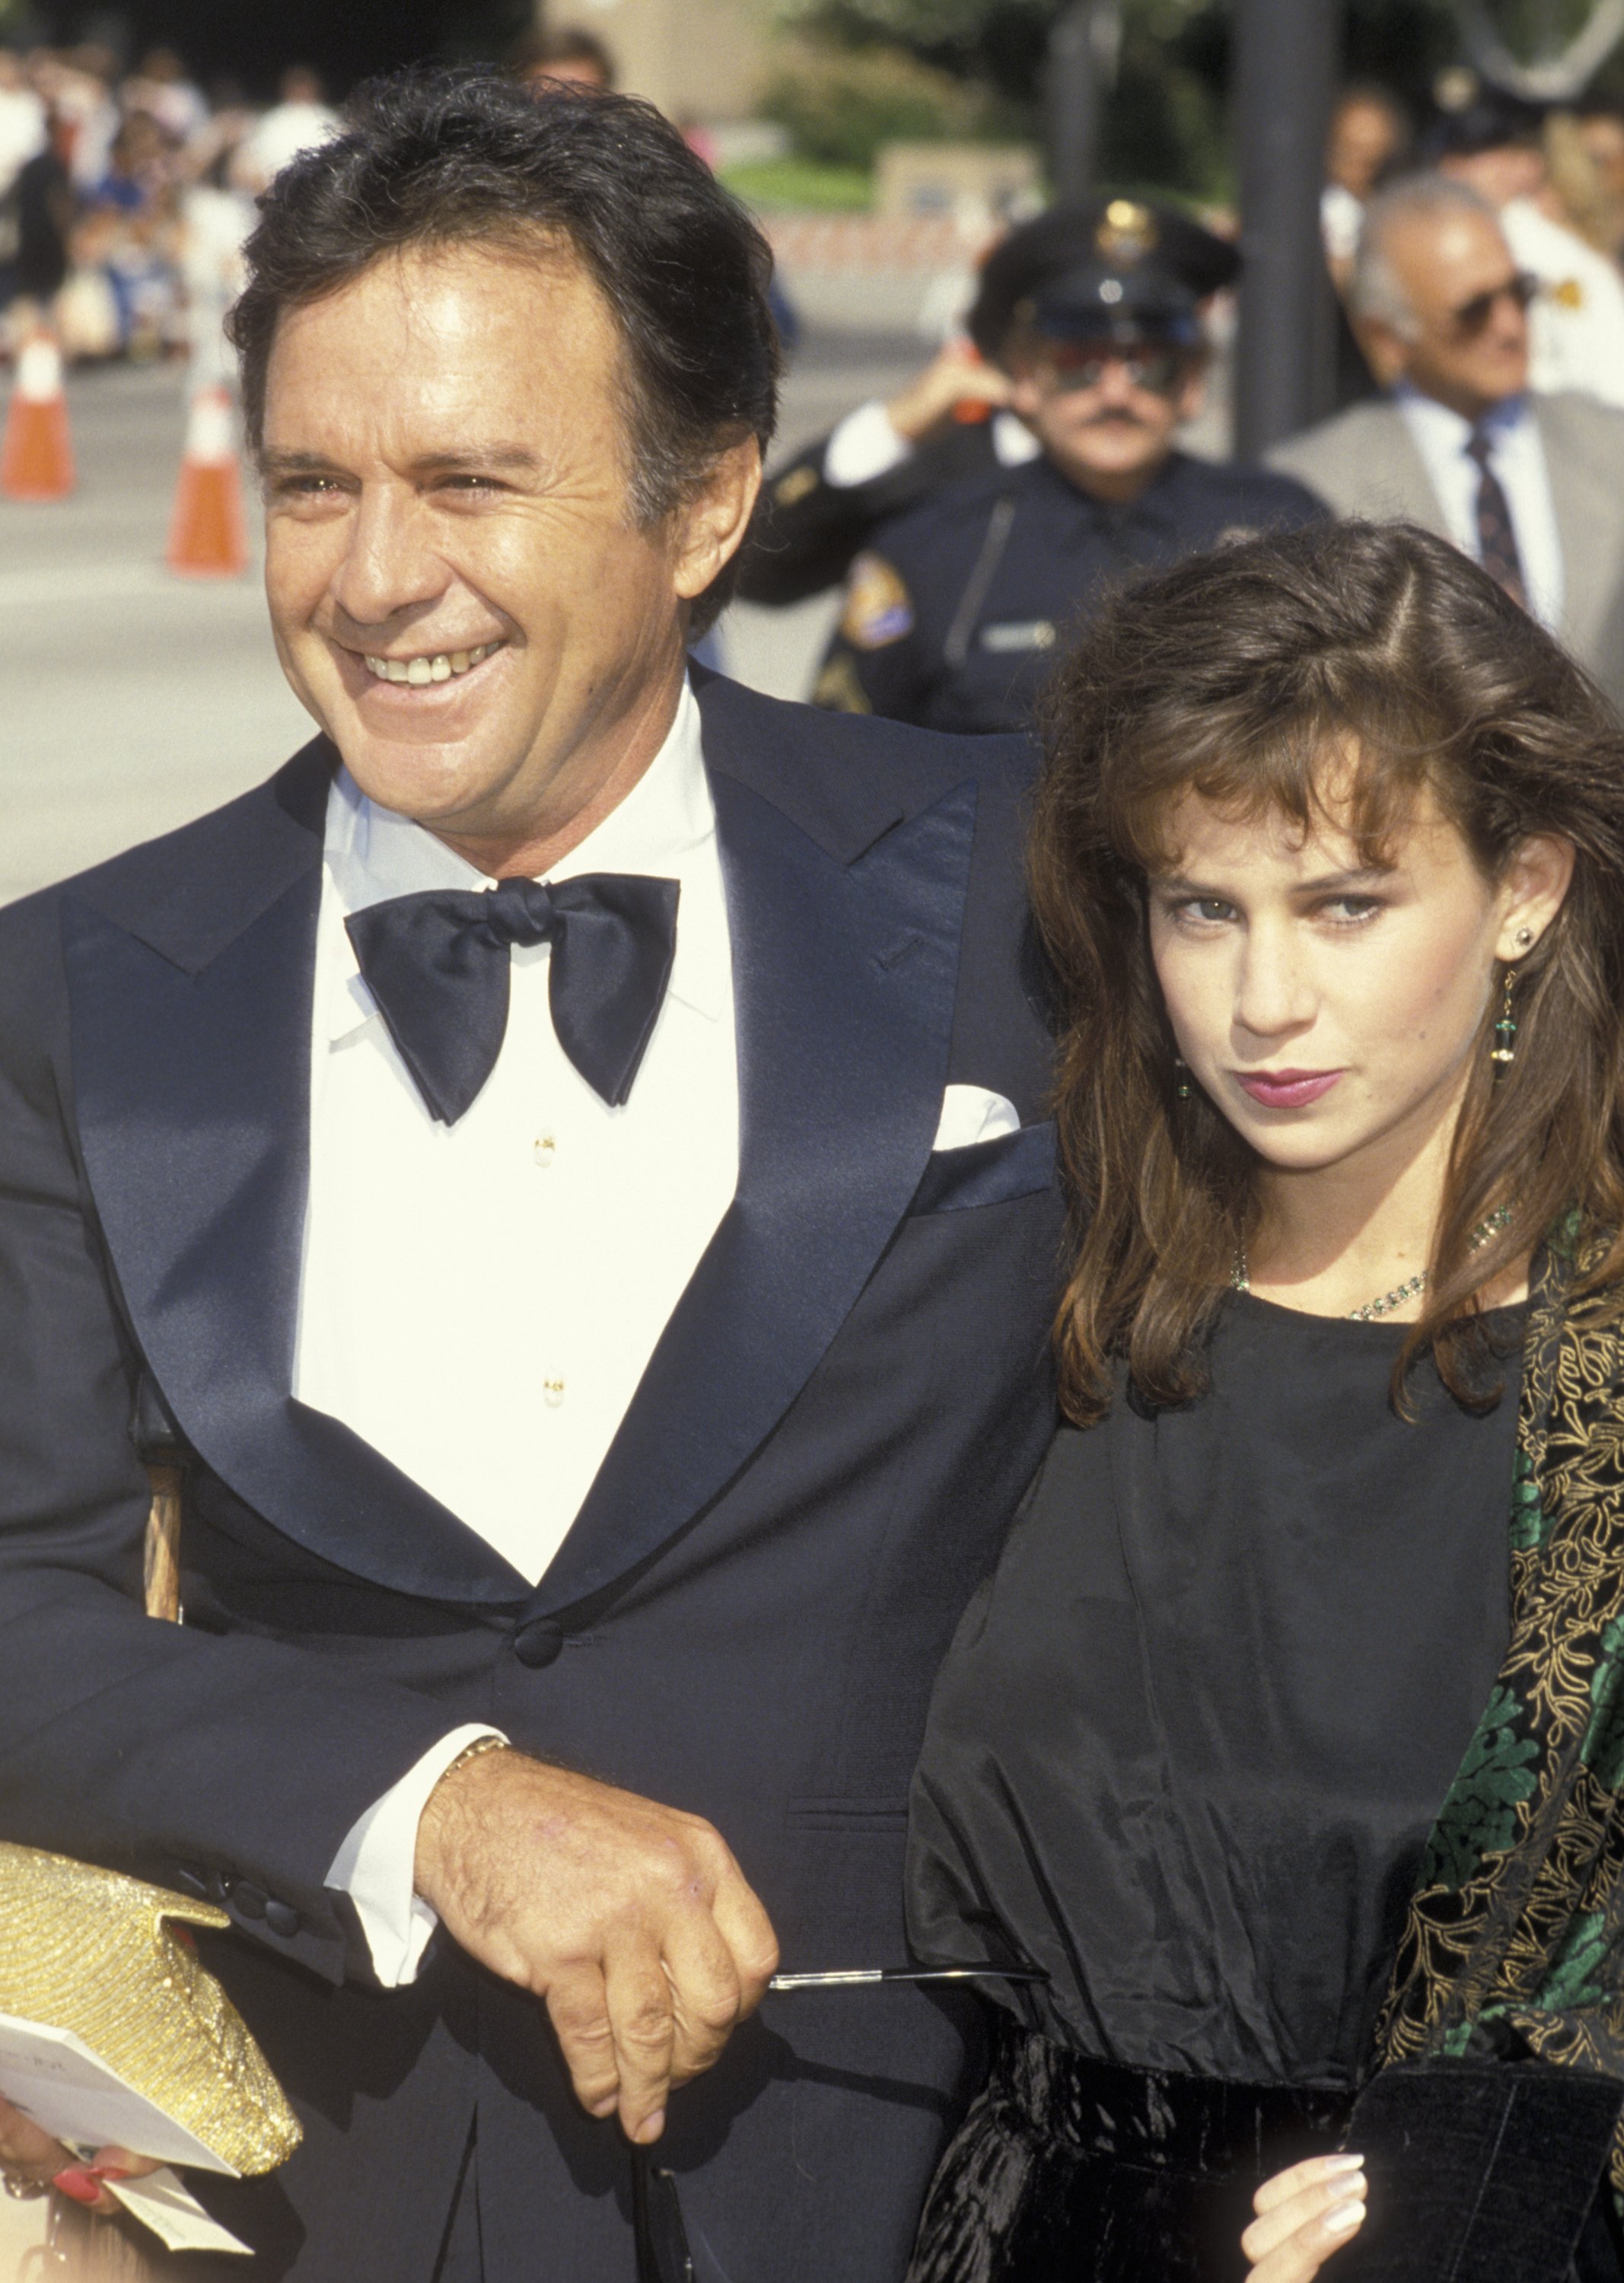 James Stacy and his daughter Heather at the 38th Annual Primetime Emmy Awards, 1986. | Photo: Getty Images